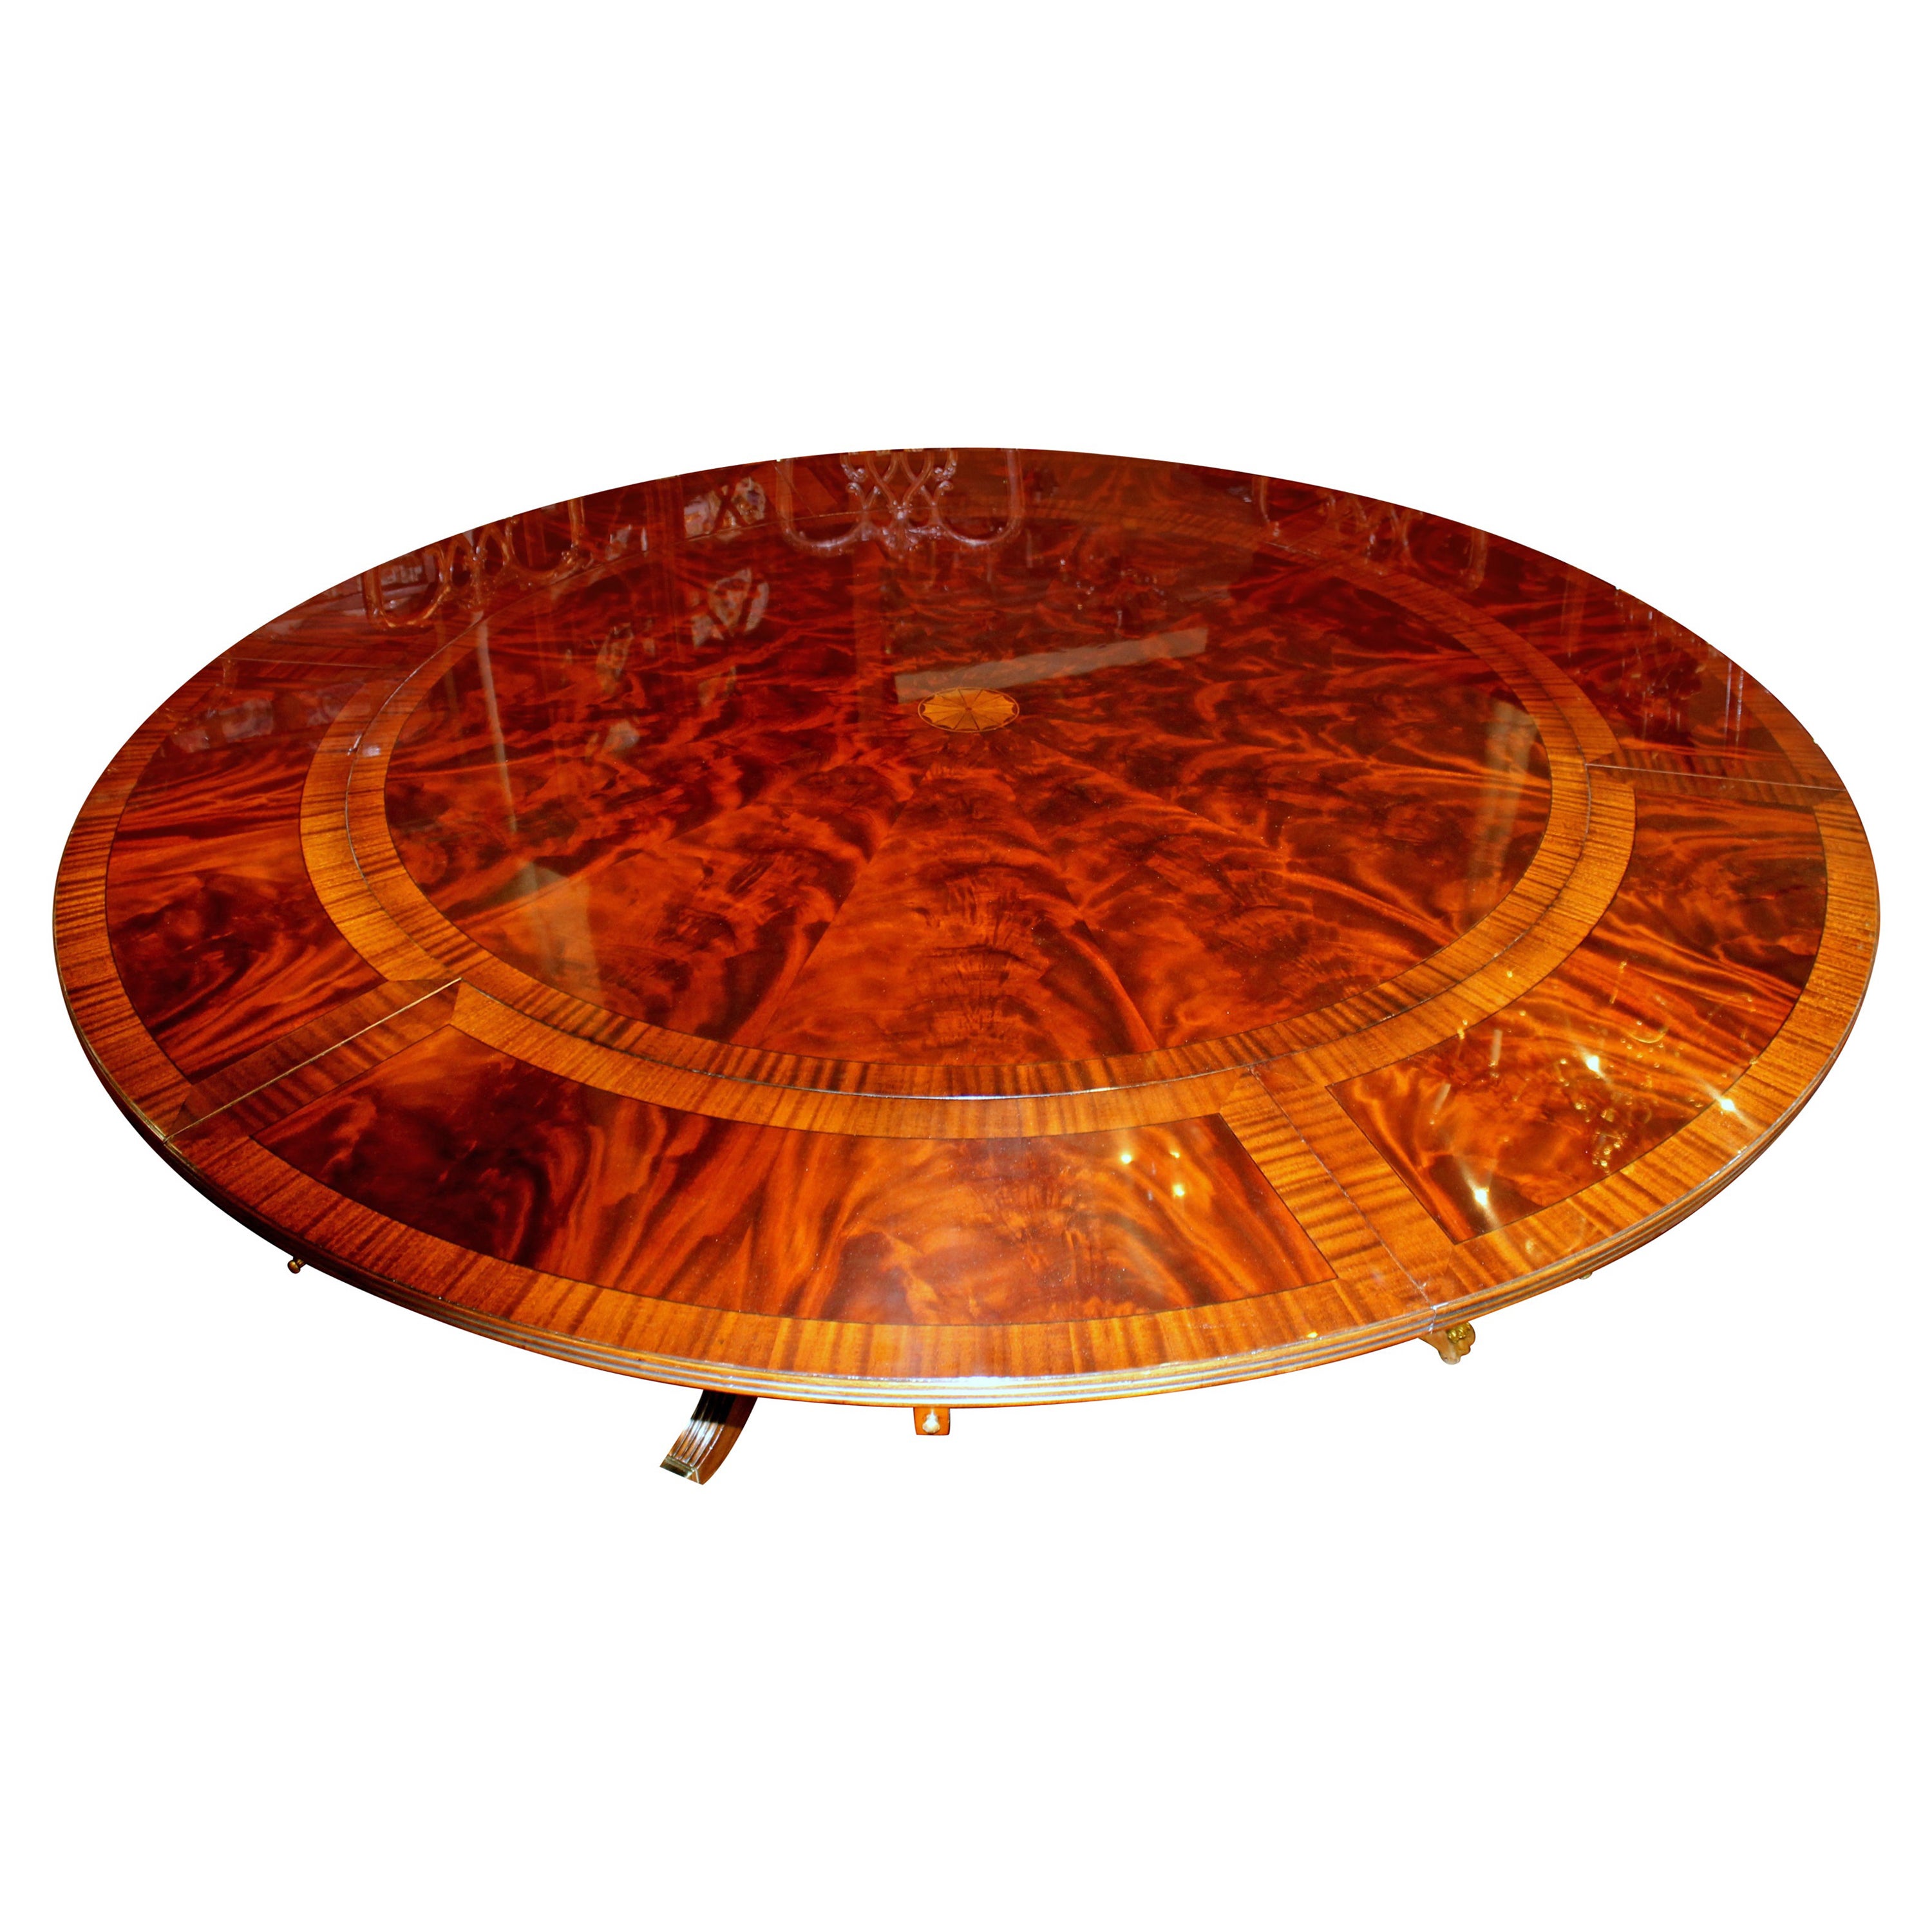 Benchmade Bookmatched Flame Mahogany Perimeter Leaf Circular Dining Table